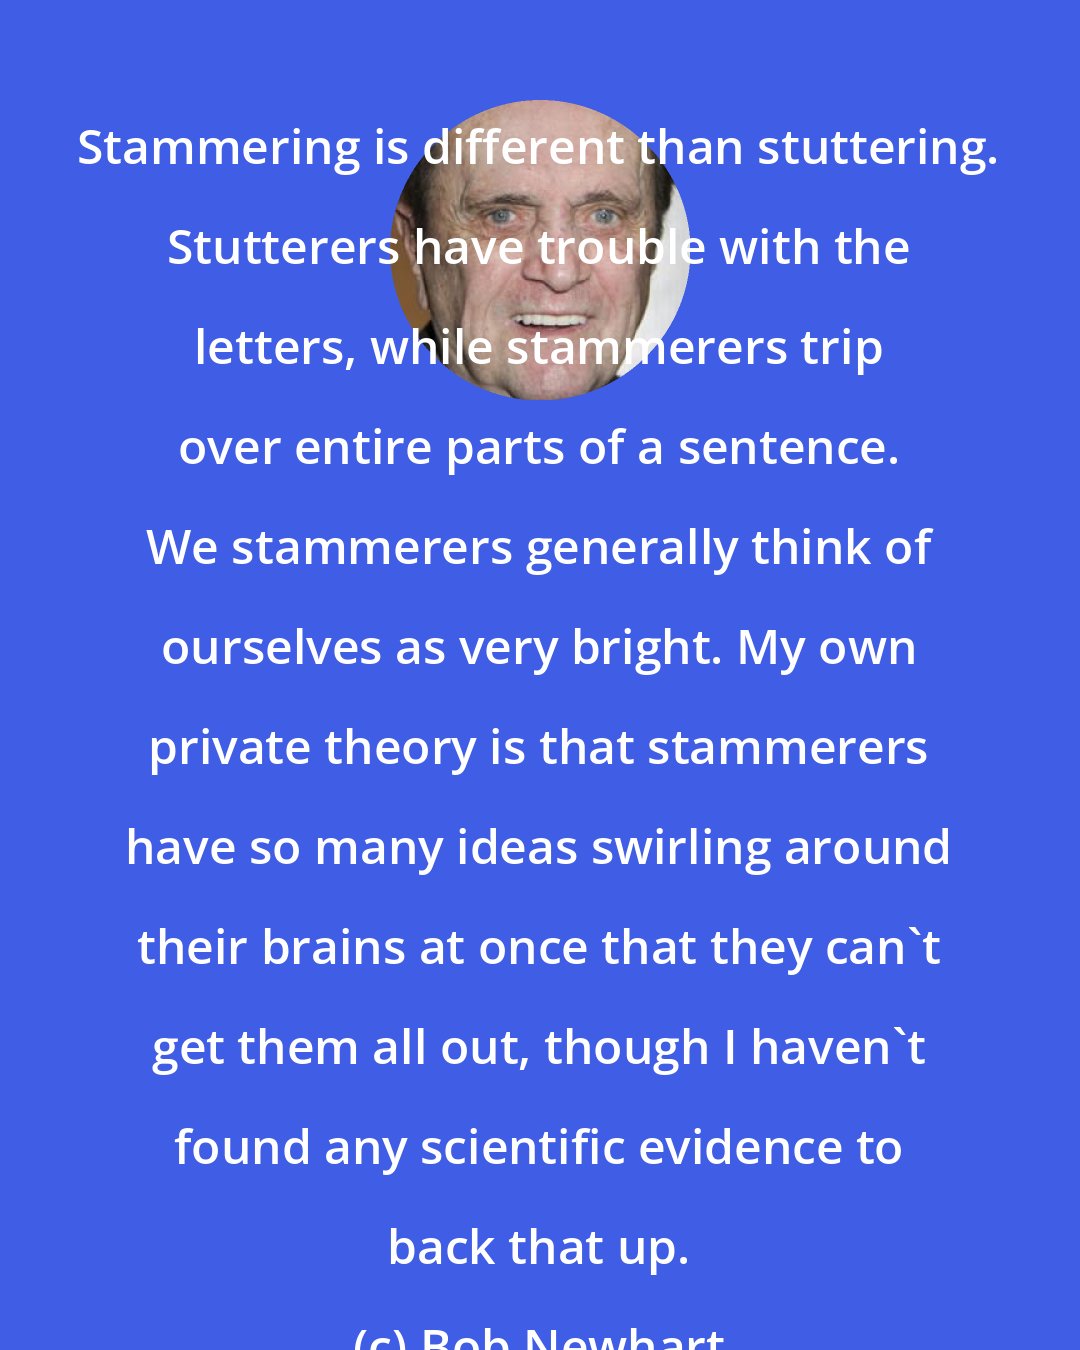 Bob Newhart: Stammering is different than stuttering. Stutterers have trouble with the letters, while stammerers trip over entire parts of a sentence. We stammerers generally think of ourselves as very bright. My own private theory is that stammerers have so many ideas swirling around their brains at once that they can't get them all out, though I haven't found any scientific evidence to back that up.